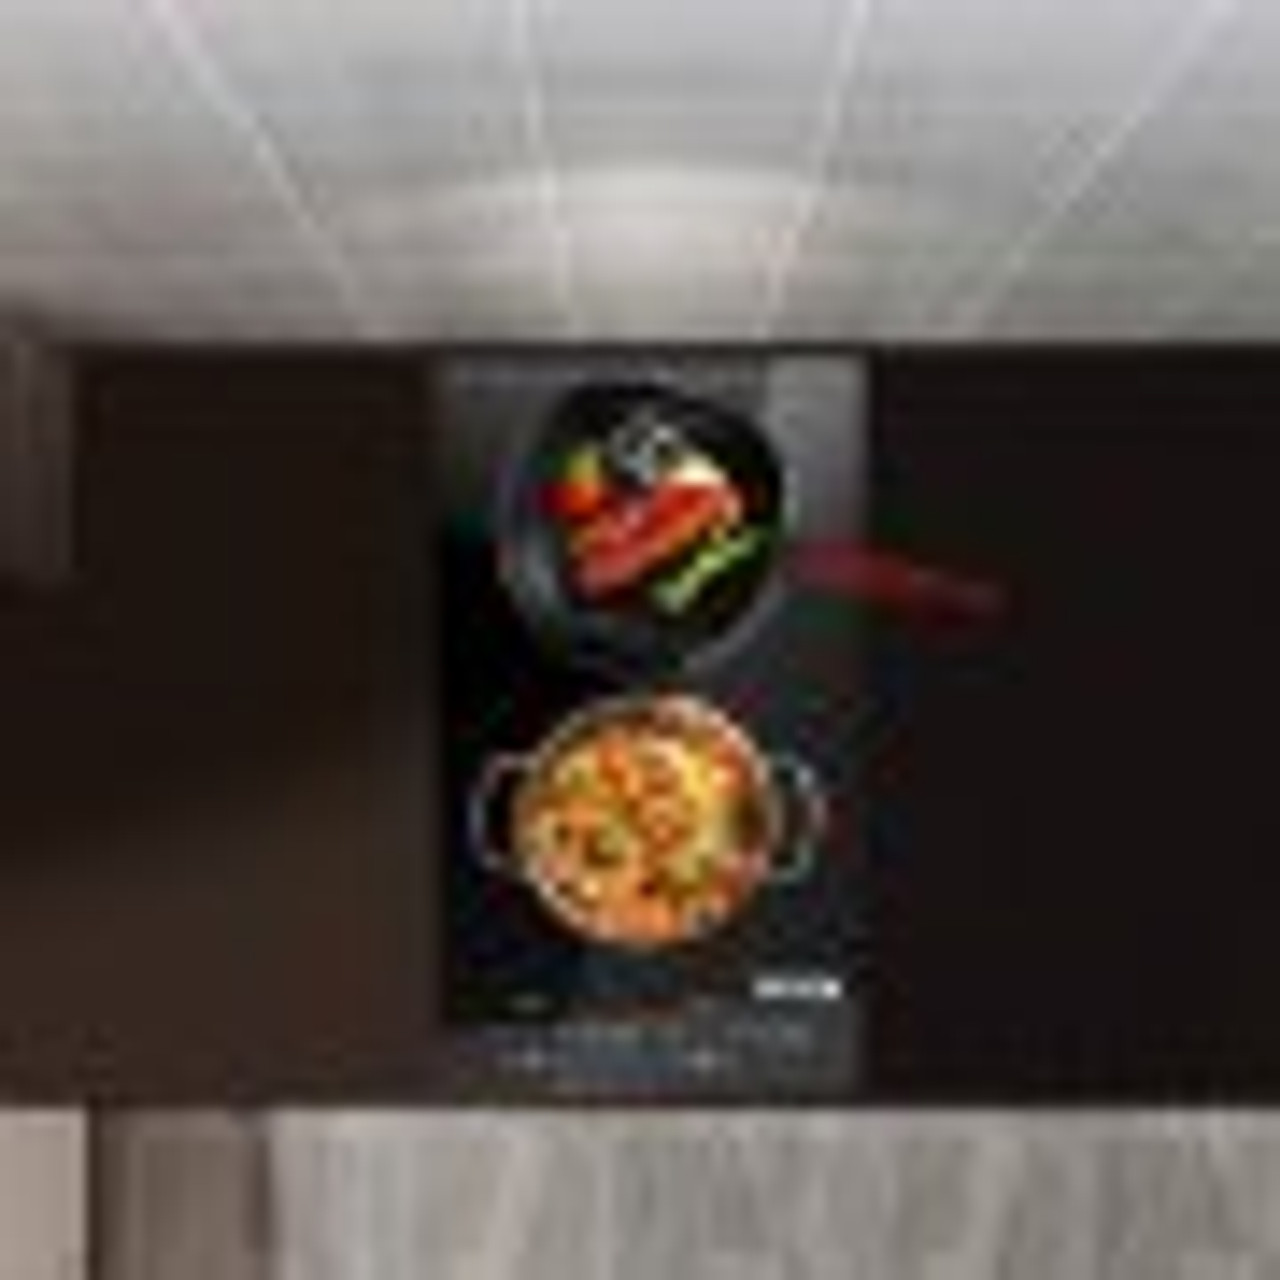 VEVOR Built-in Induction Electric Stove Top 12 Inch,2 Burners Electric  Cooktop,9 Power Levels & Sensor Touch Control,Easy to Clean Ceramic Glass